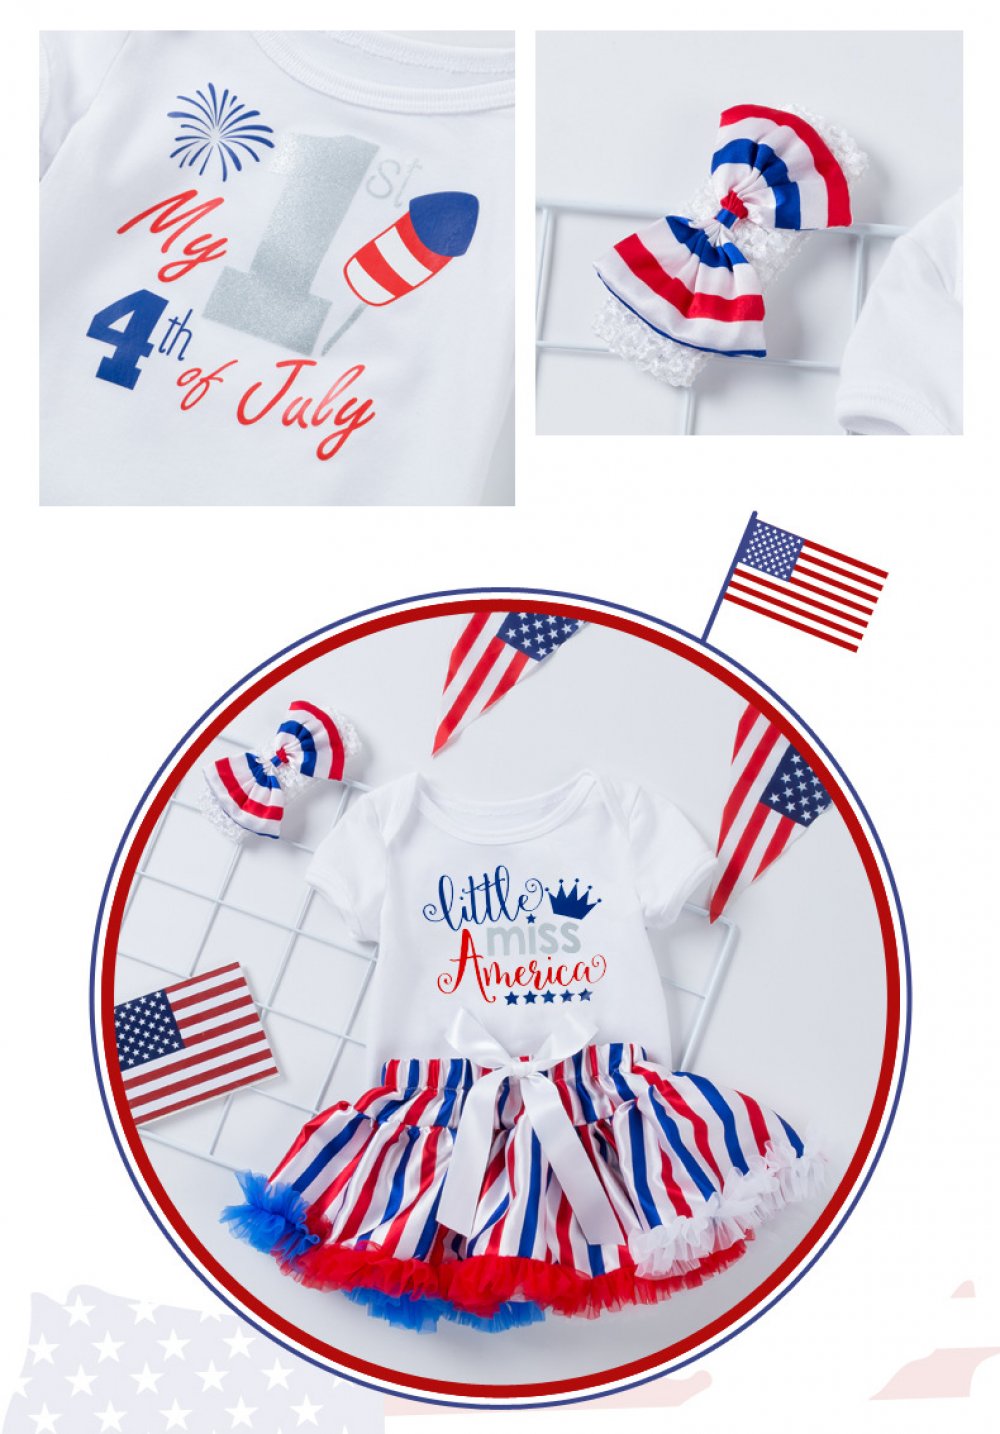 Newborn Baby Girls Summer Independence Day Set Short-sleeved Printed Romper Striped Skirt And Headband Three-piece Set 0-1-2Y Wholesale Baby Clothes